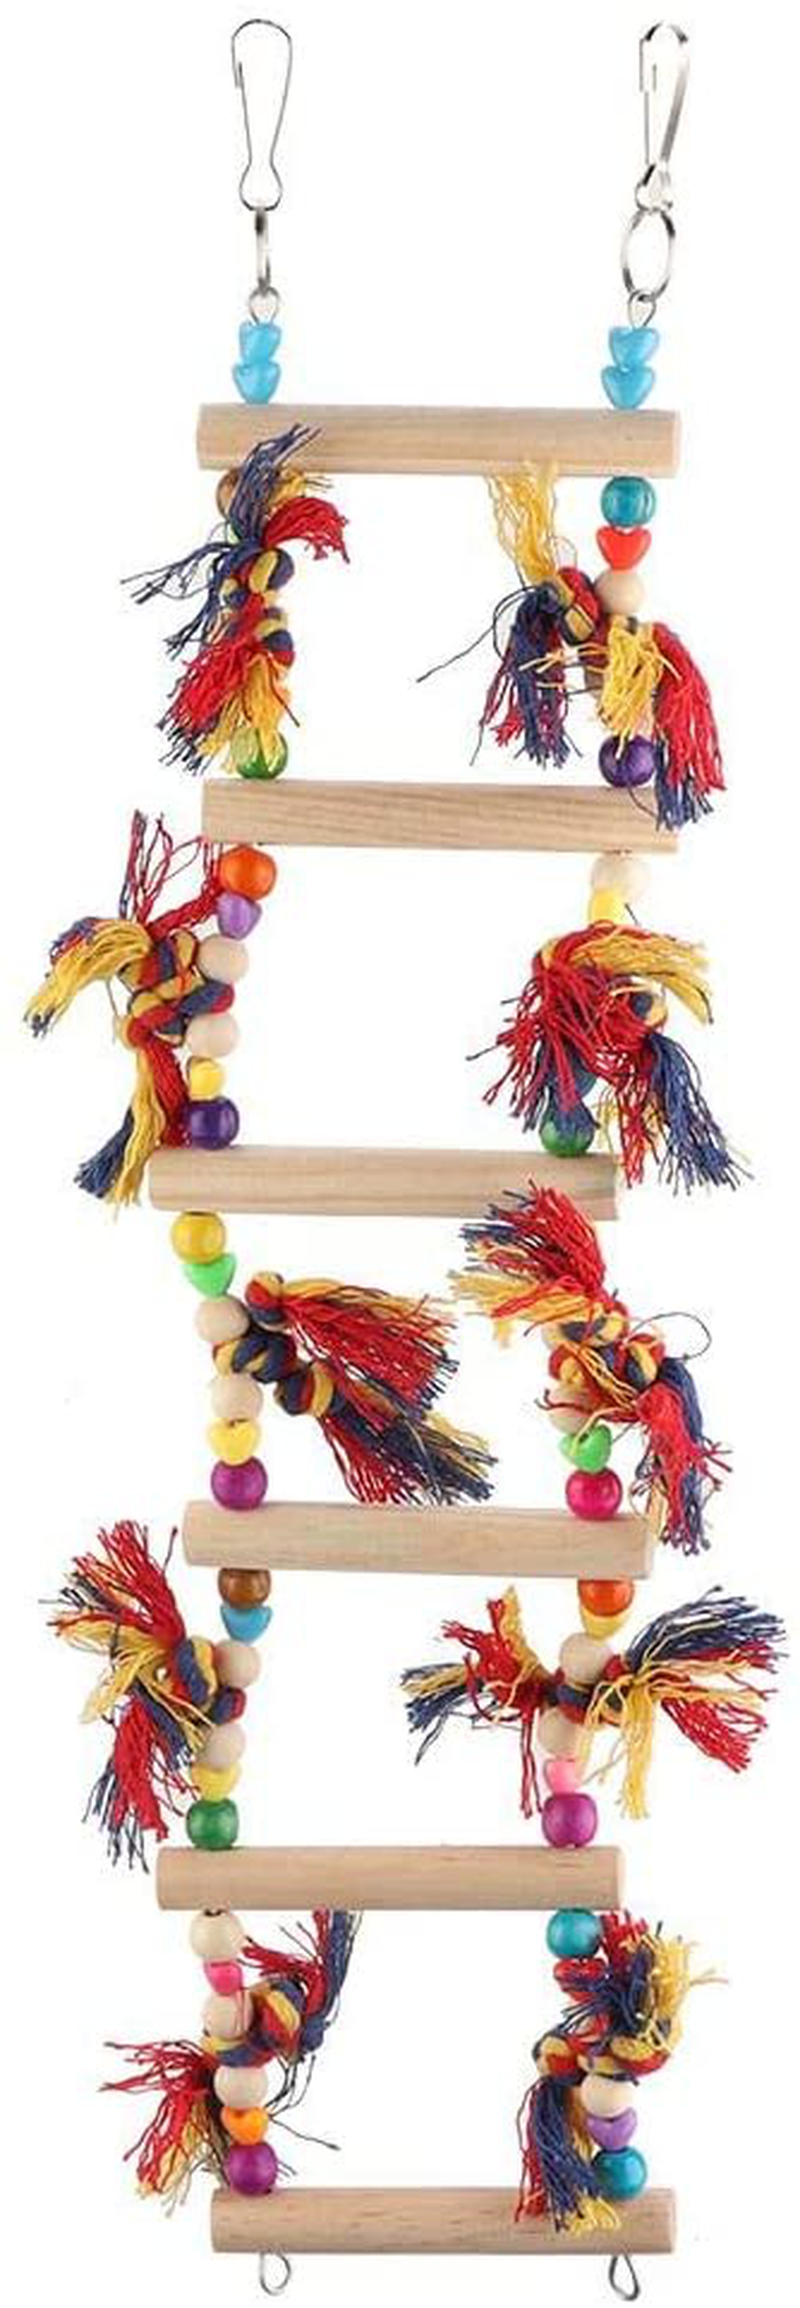 HEEPDD Parrot Hanging Ladder Toys, Bird Nature Wood Chewing Playthings Parakeets Conures Hanging Swinging Standing Perch Cage Accessory for Small and Medium-Sized Parrots